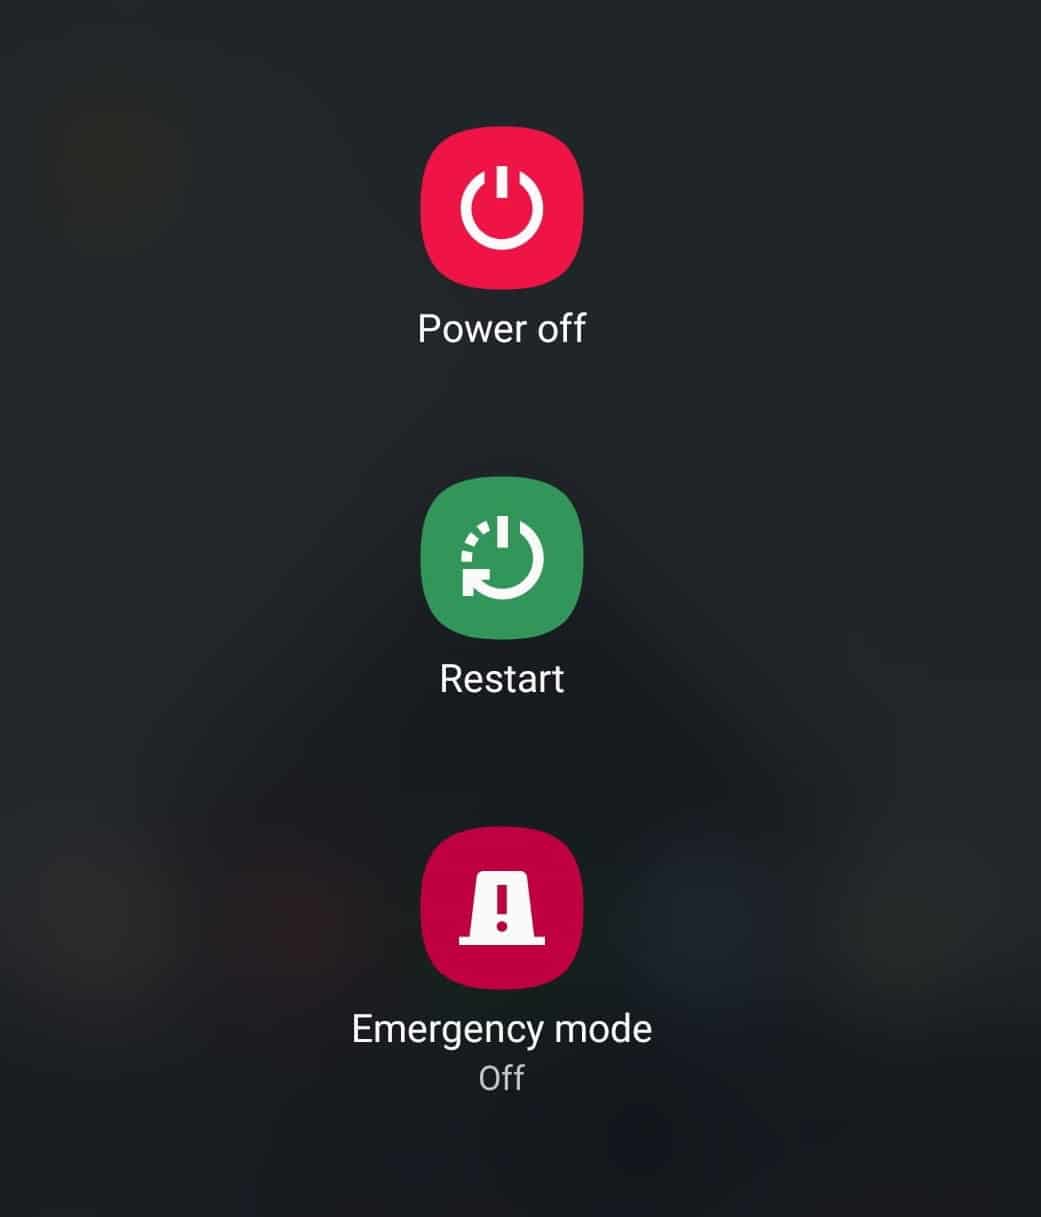 How to boot into Safe mode on Android